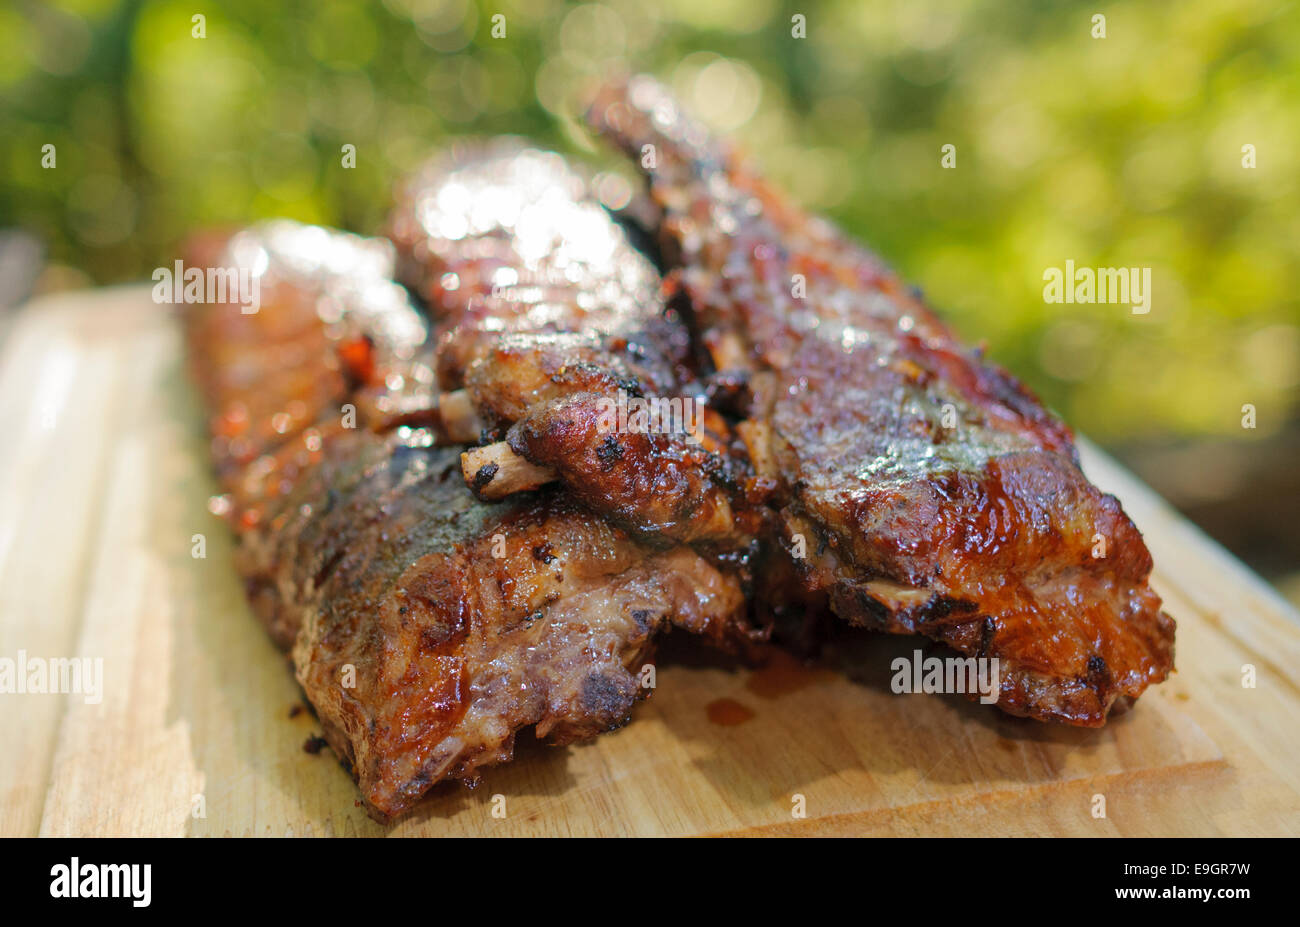 Slow cooked smoked, barbecued pork spare ribs. Stock Photo